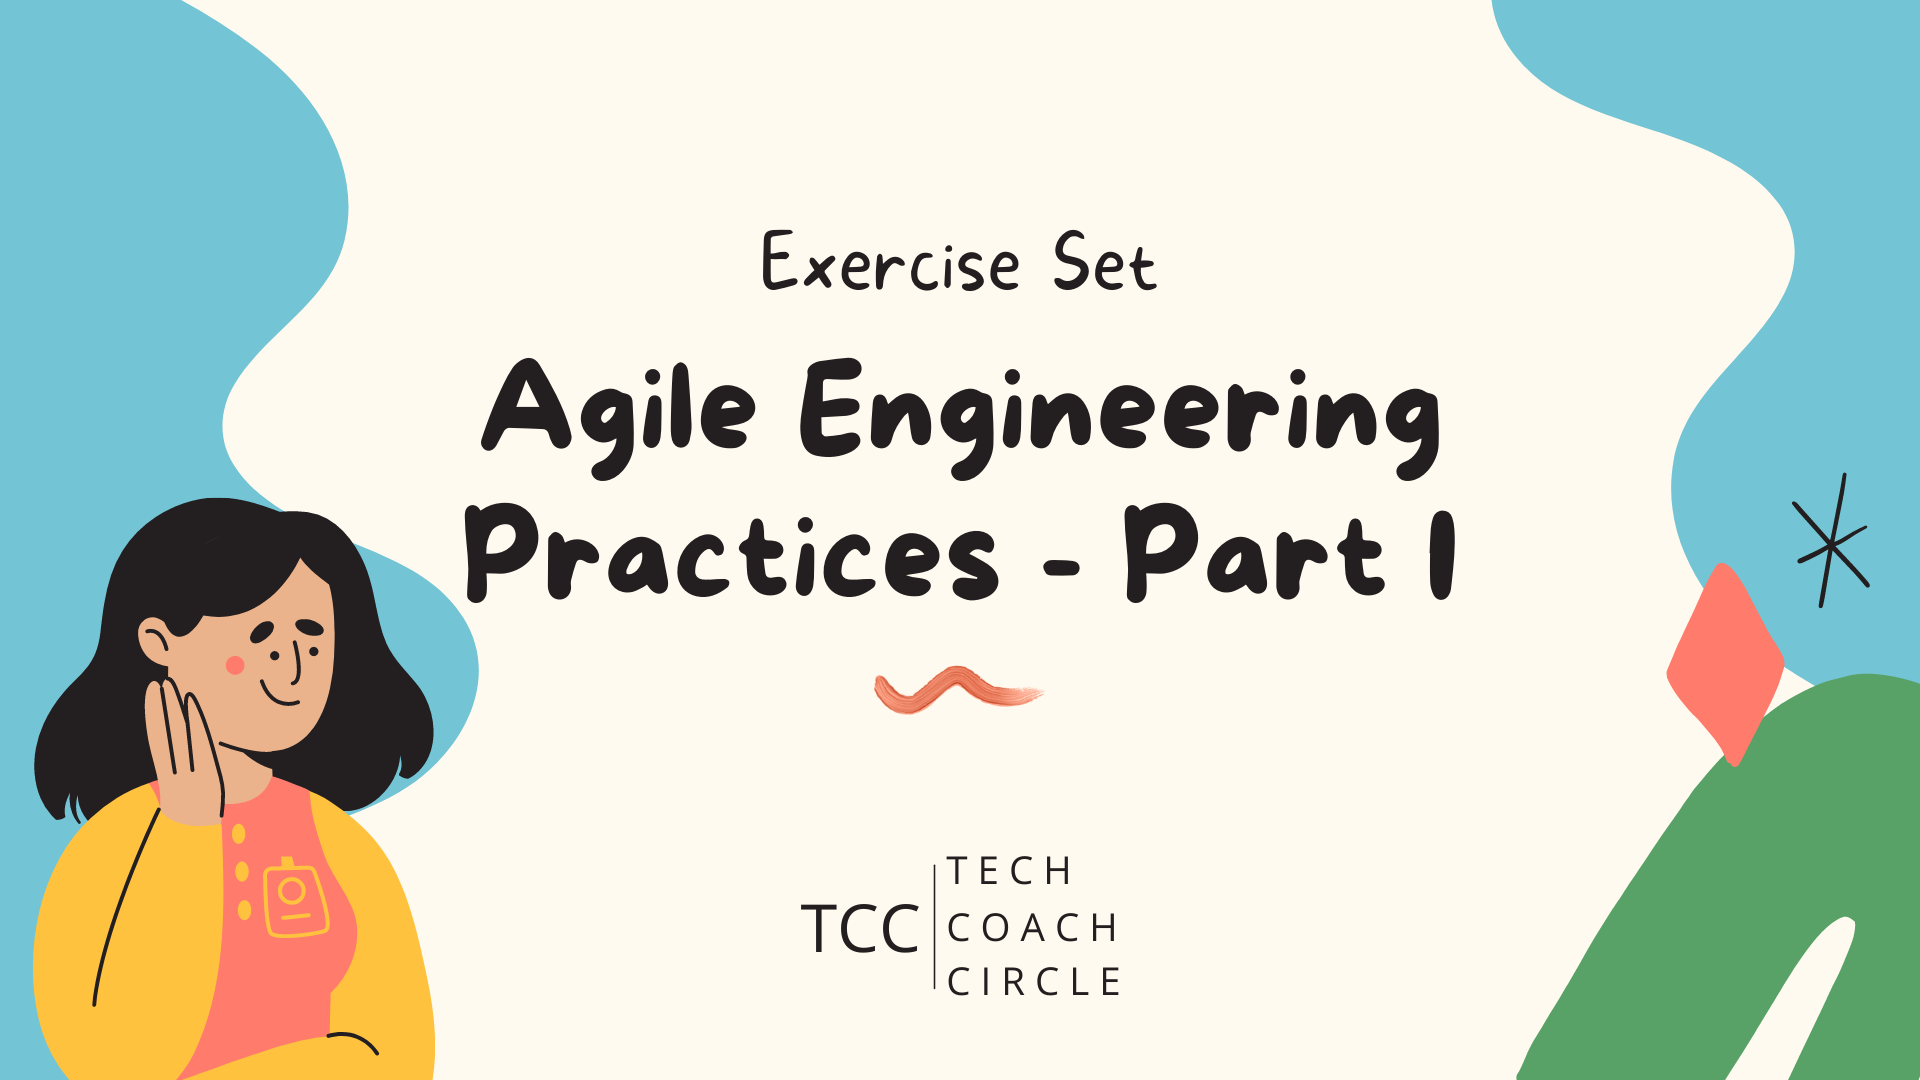 Agile Engineering Practices - Part I